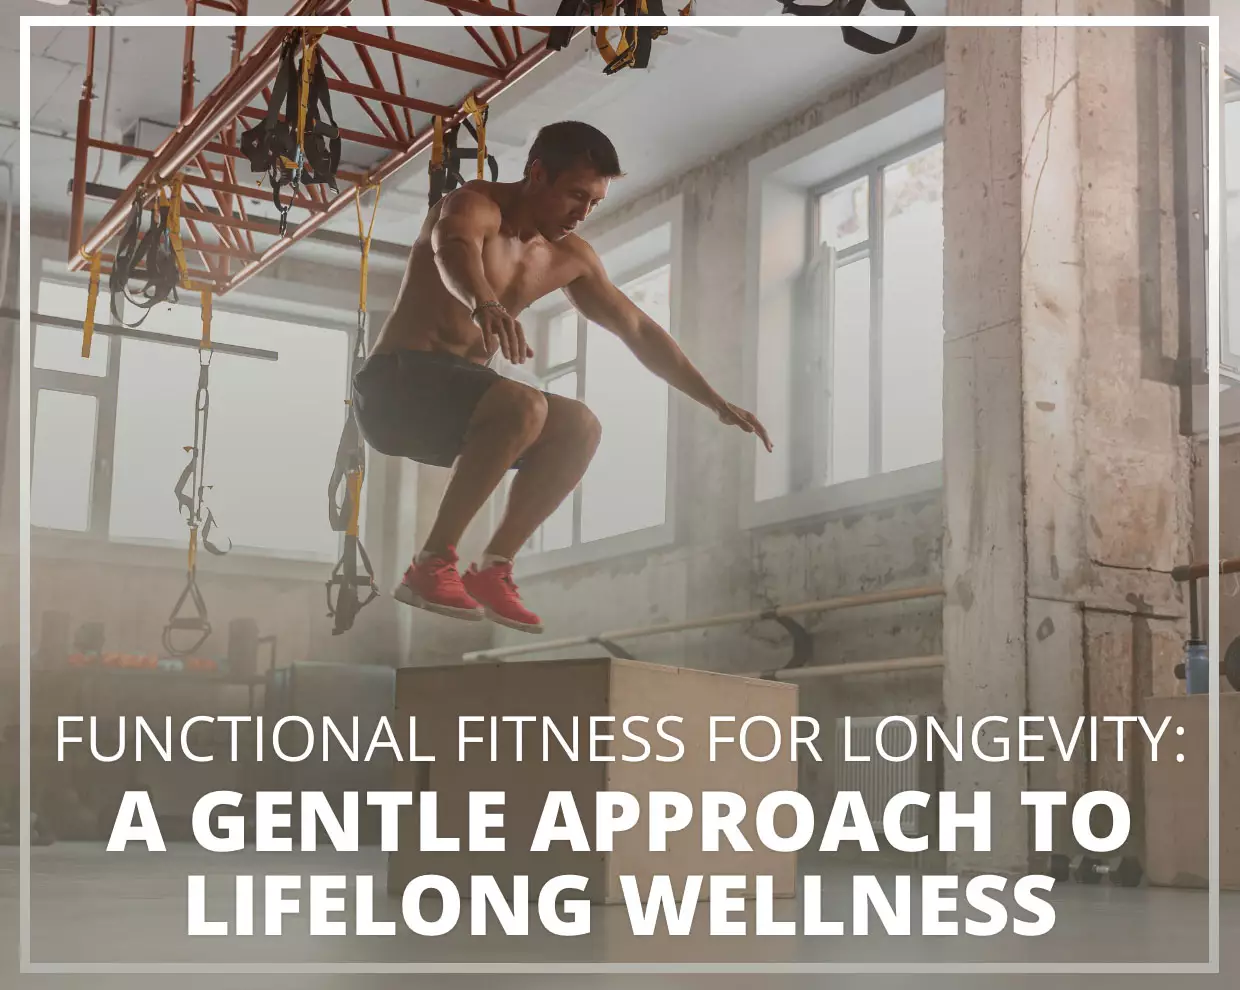 Functional Fitness for Longevity: A Gentle Approach to Lifelong Wellness